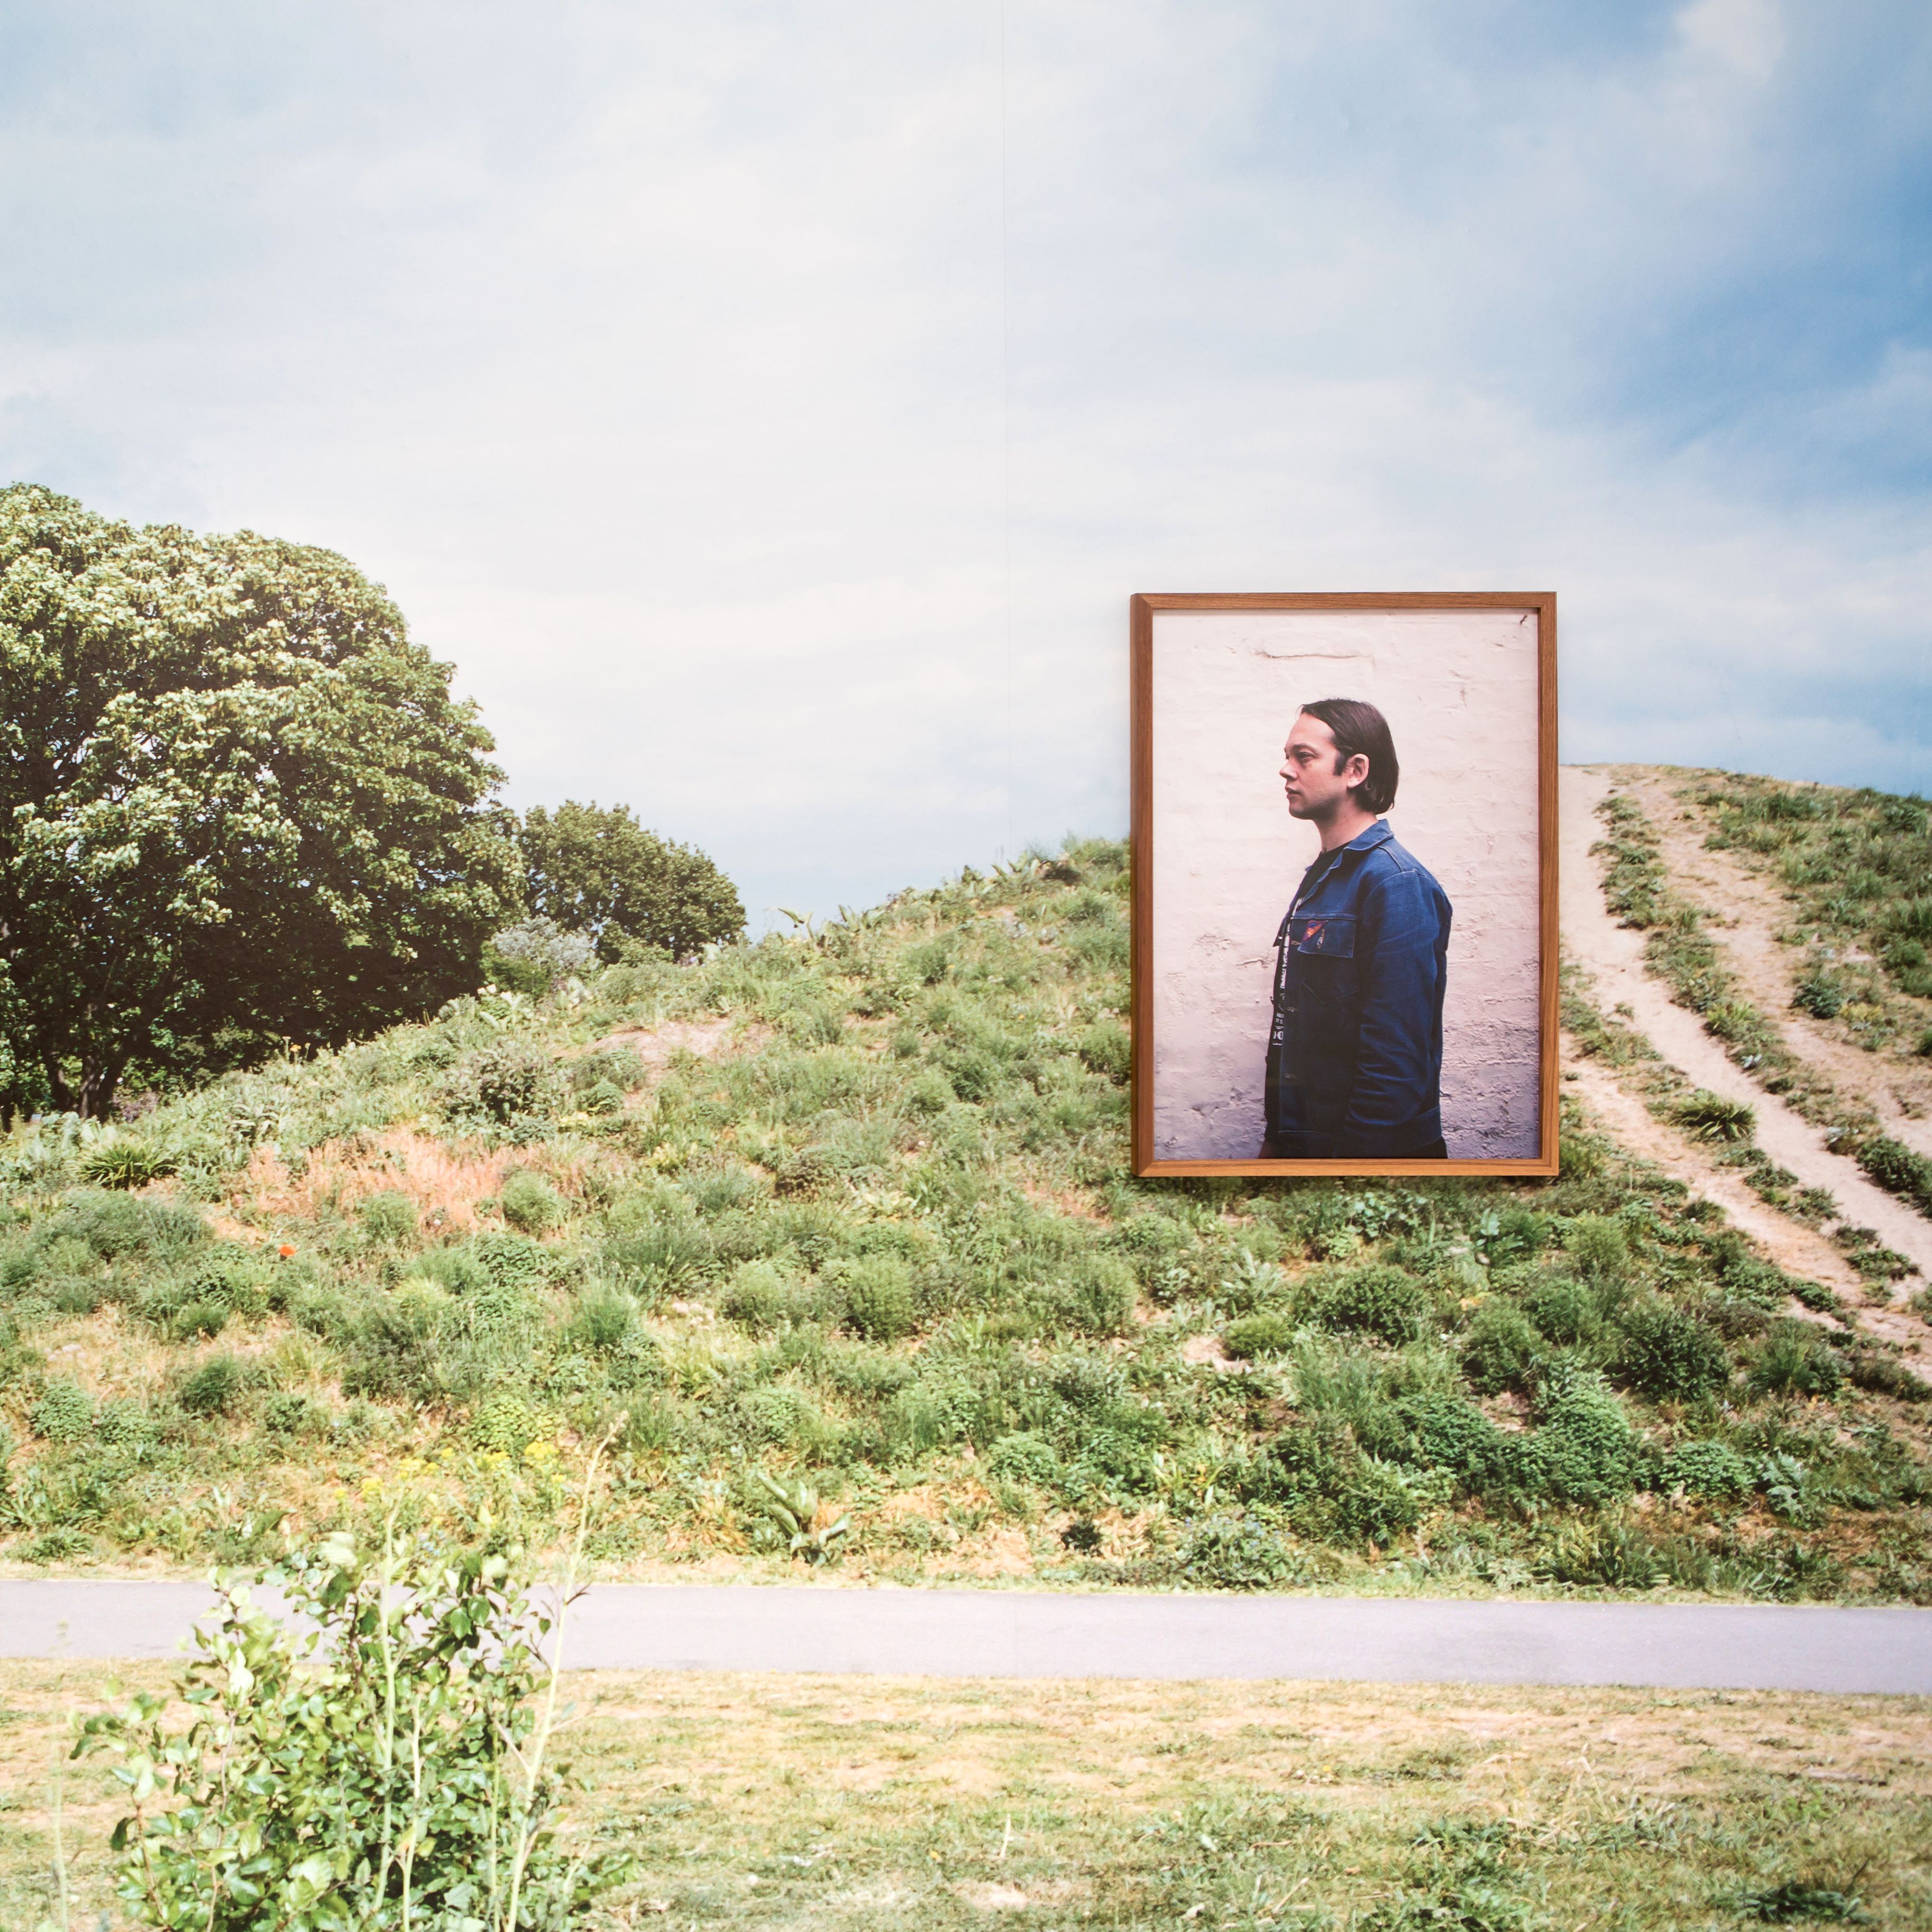 Green space with a large photography installation of a man.   